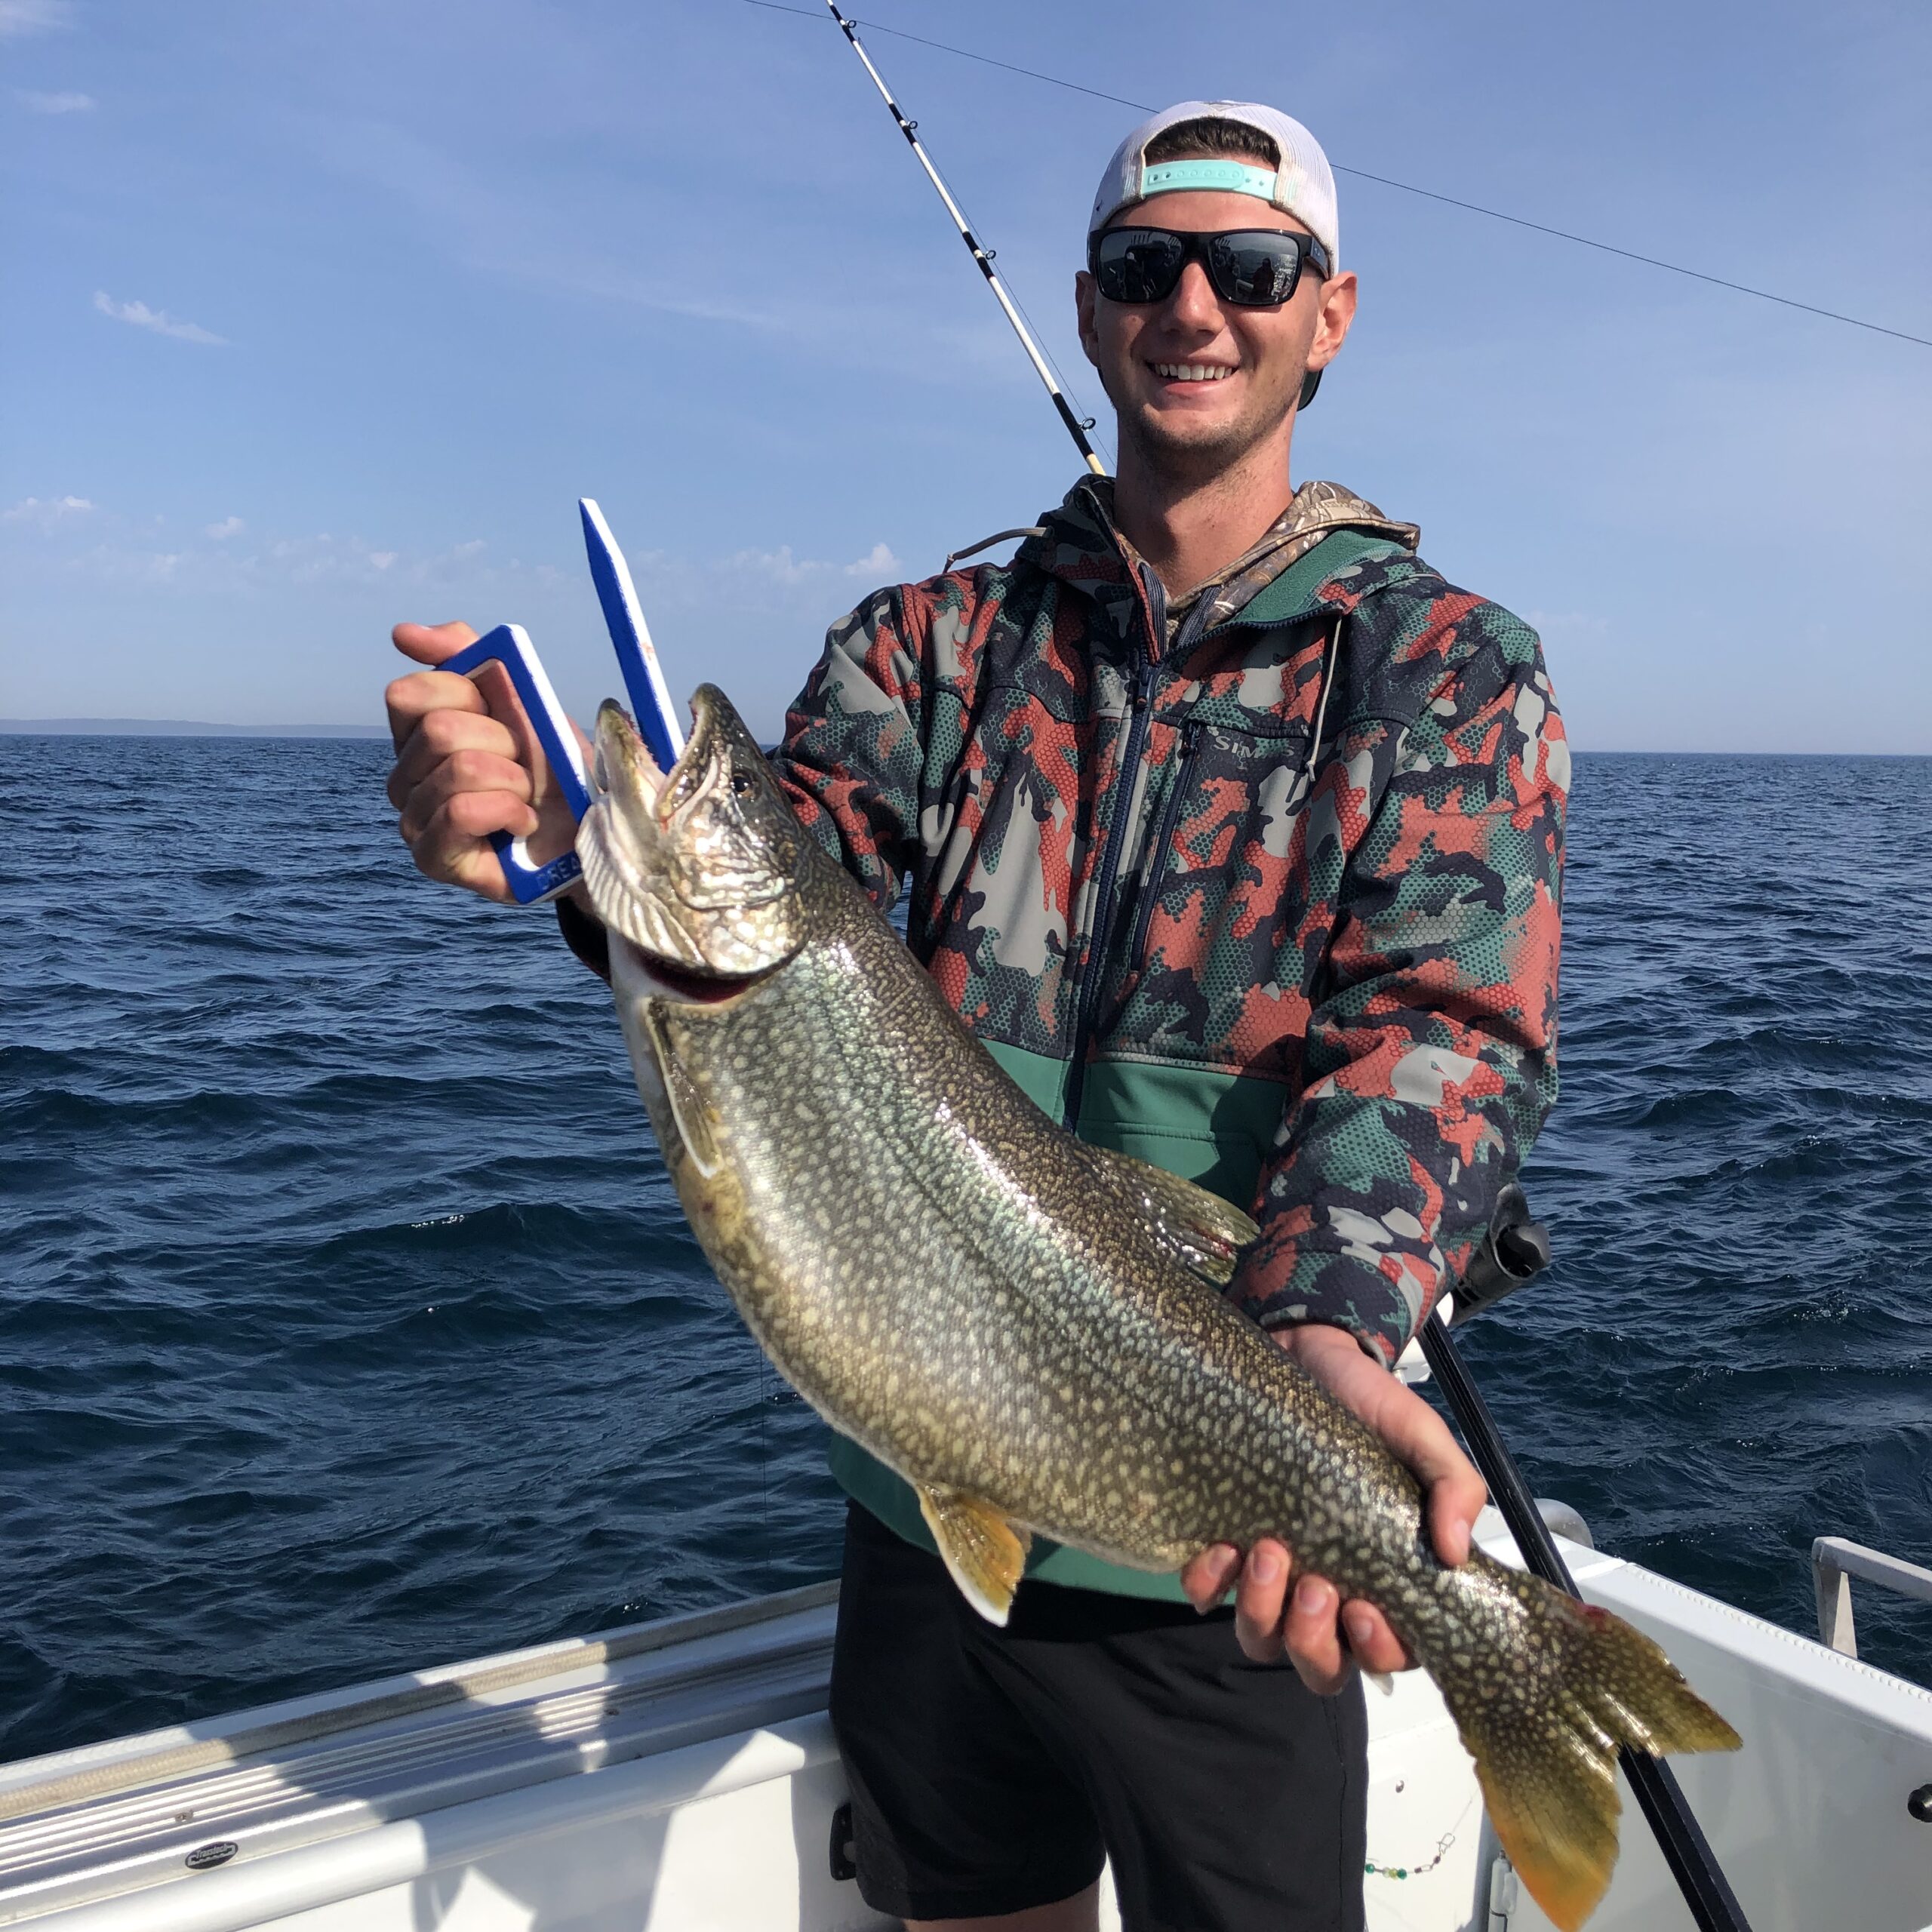 Grand Traverse Bay fishing charter catch of the day